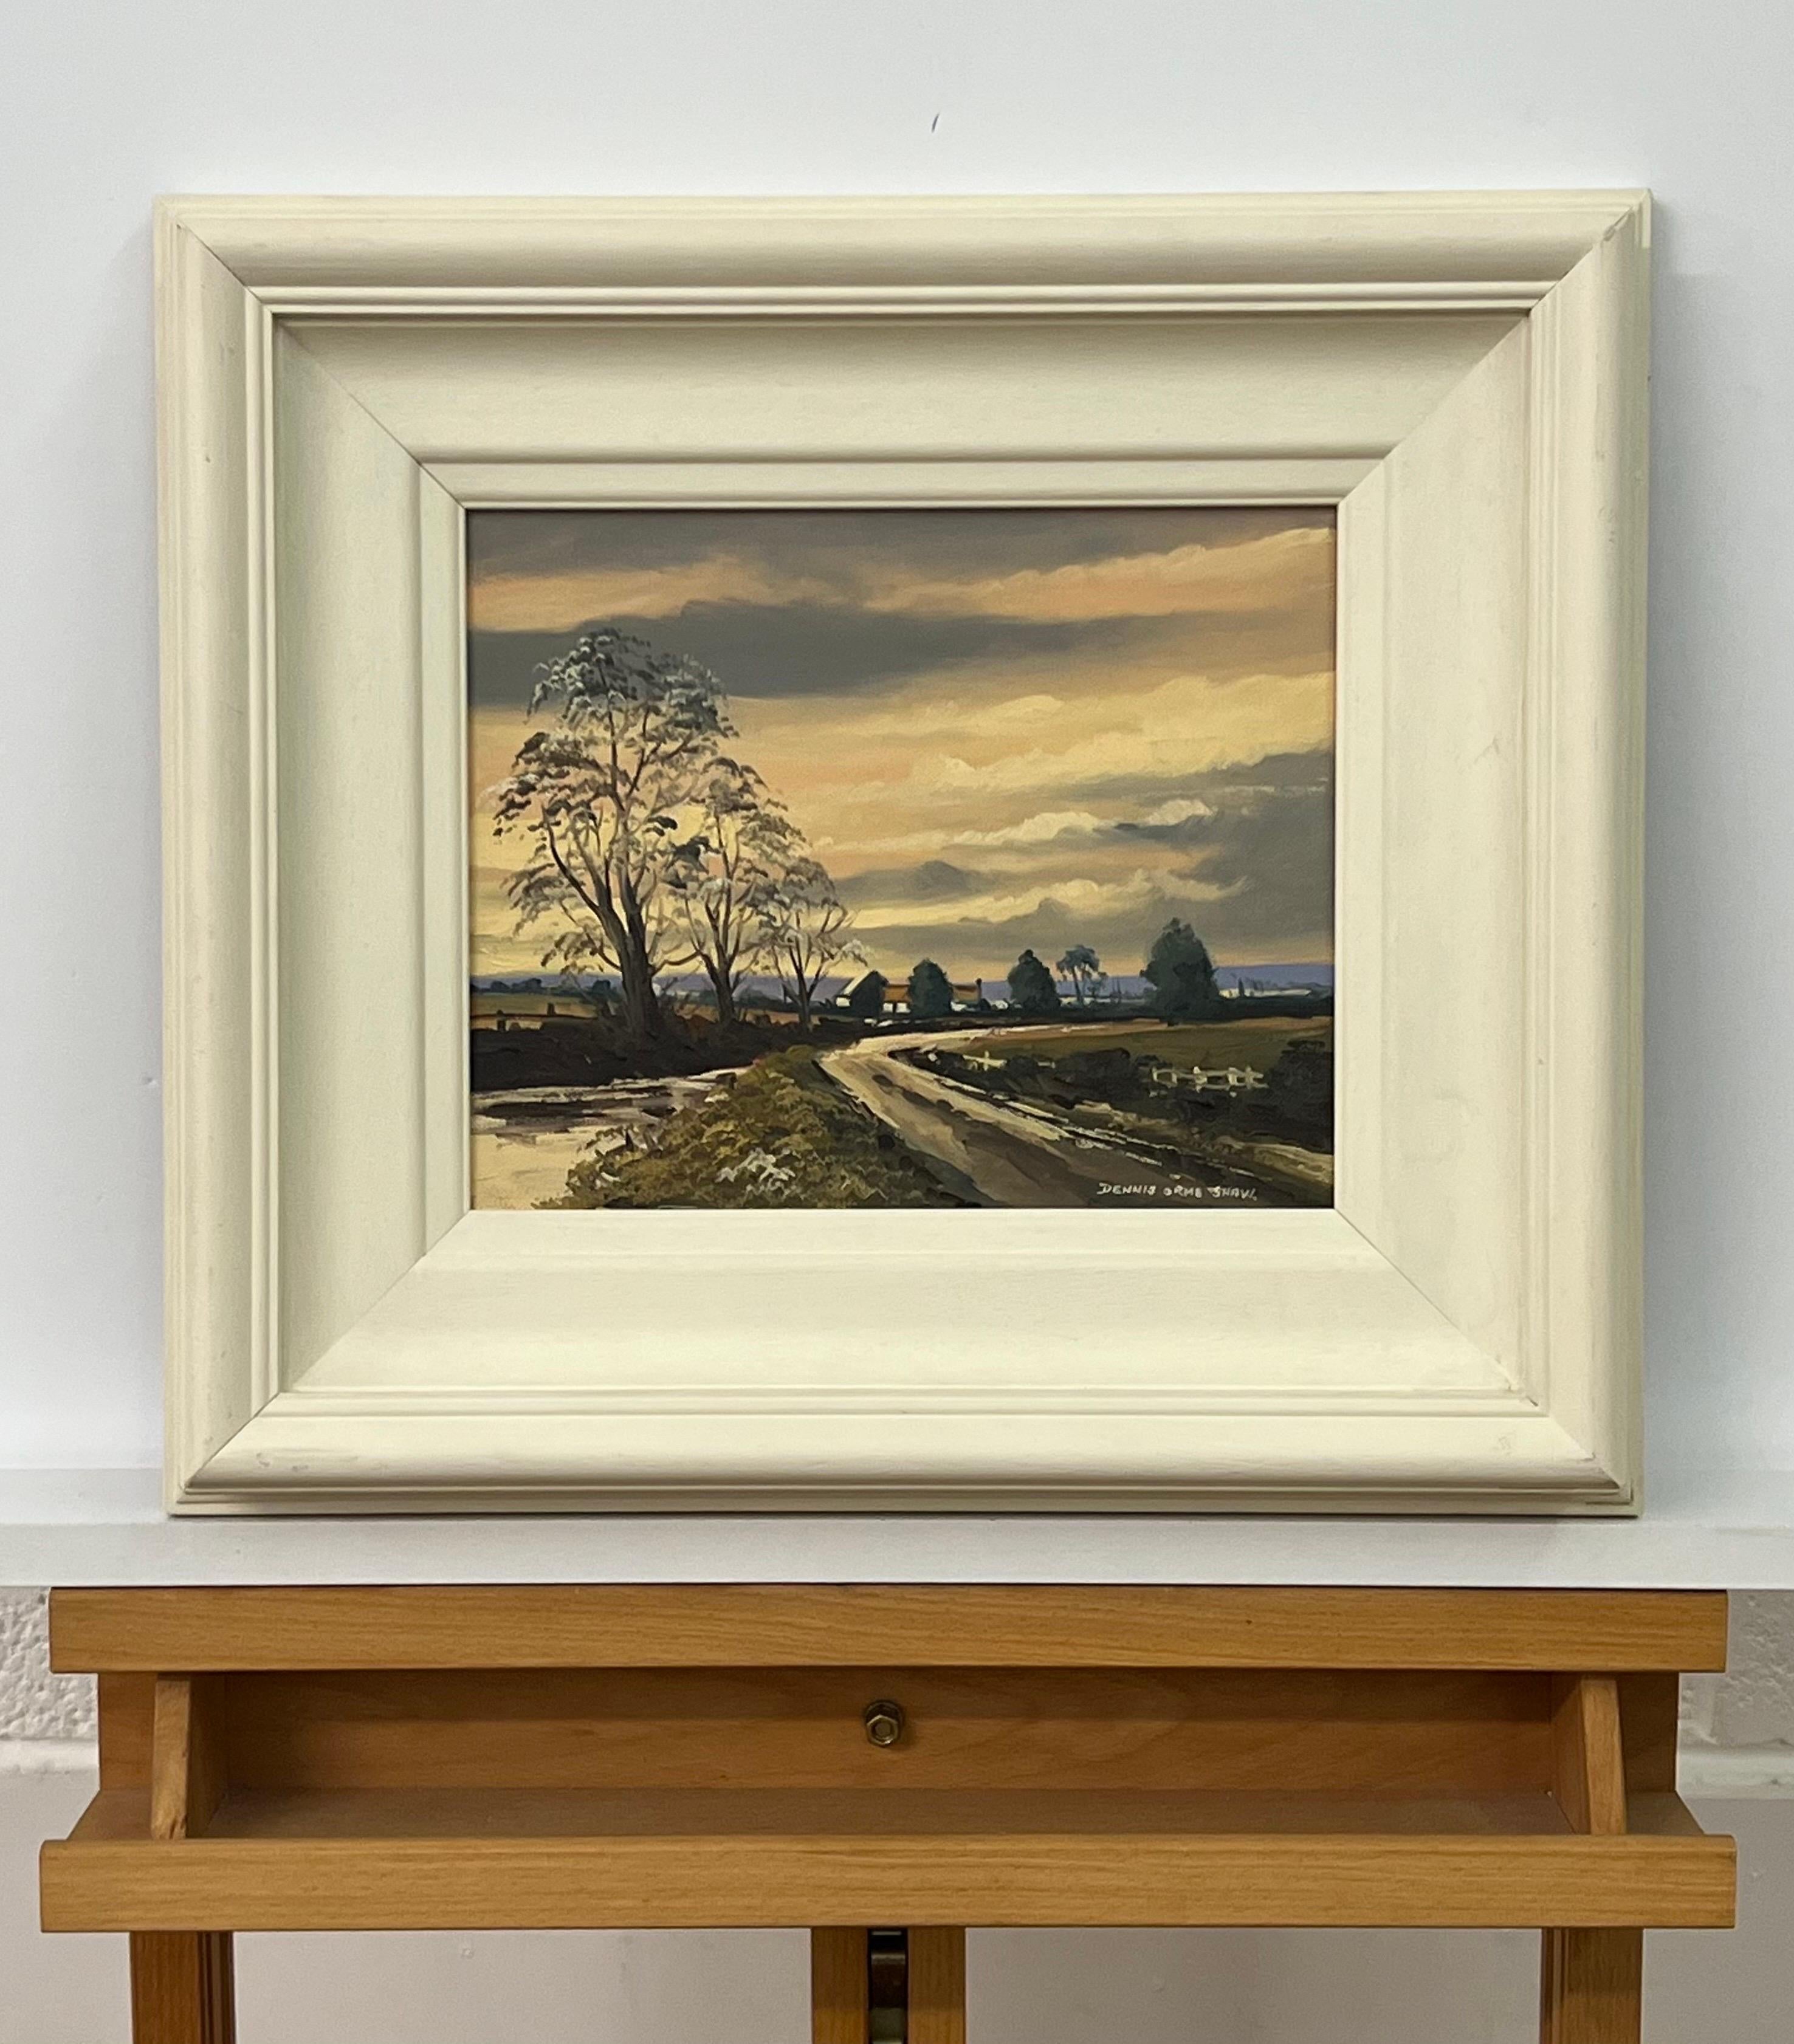 Sunset in Ireland Countryside - Original Oil Painting by Northern Irish Artist, Dennis Orme Shaw 

Art measures 10 x 8 inches 
Frame measures 16 x 14 inches 

Dennis Orme Shaw was born in Cookstown, Northern Ireland, in 1944. He studied at the